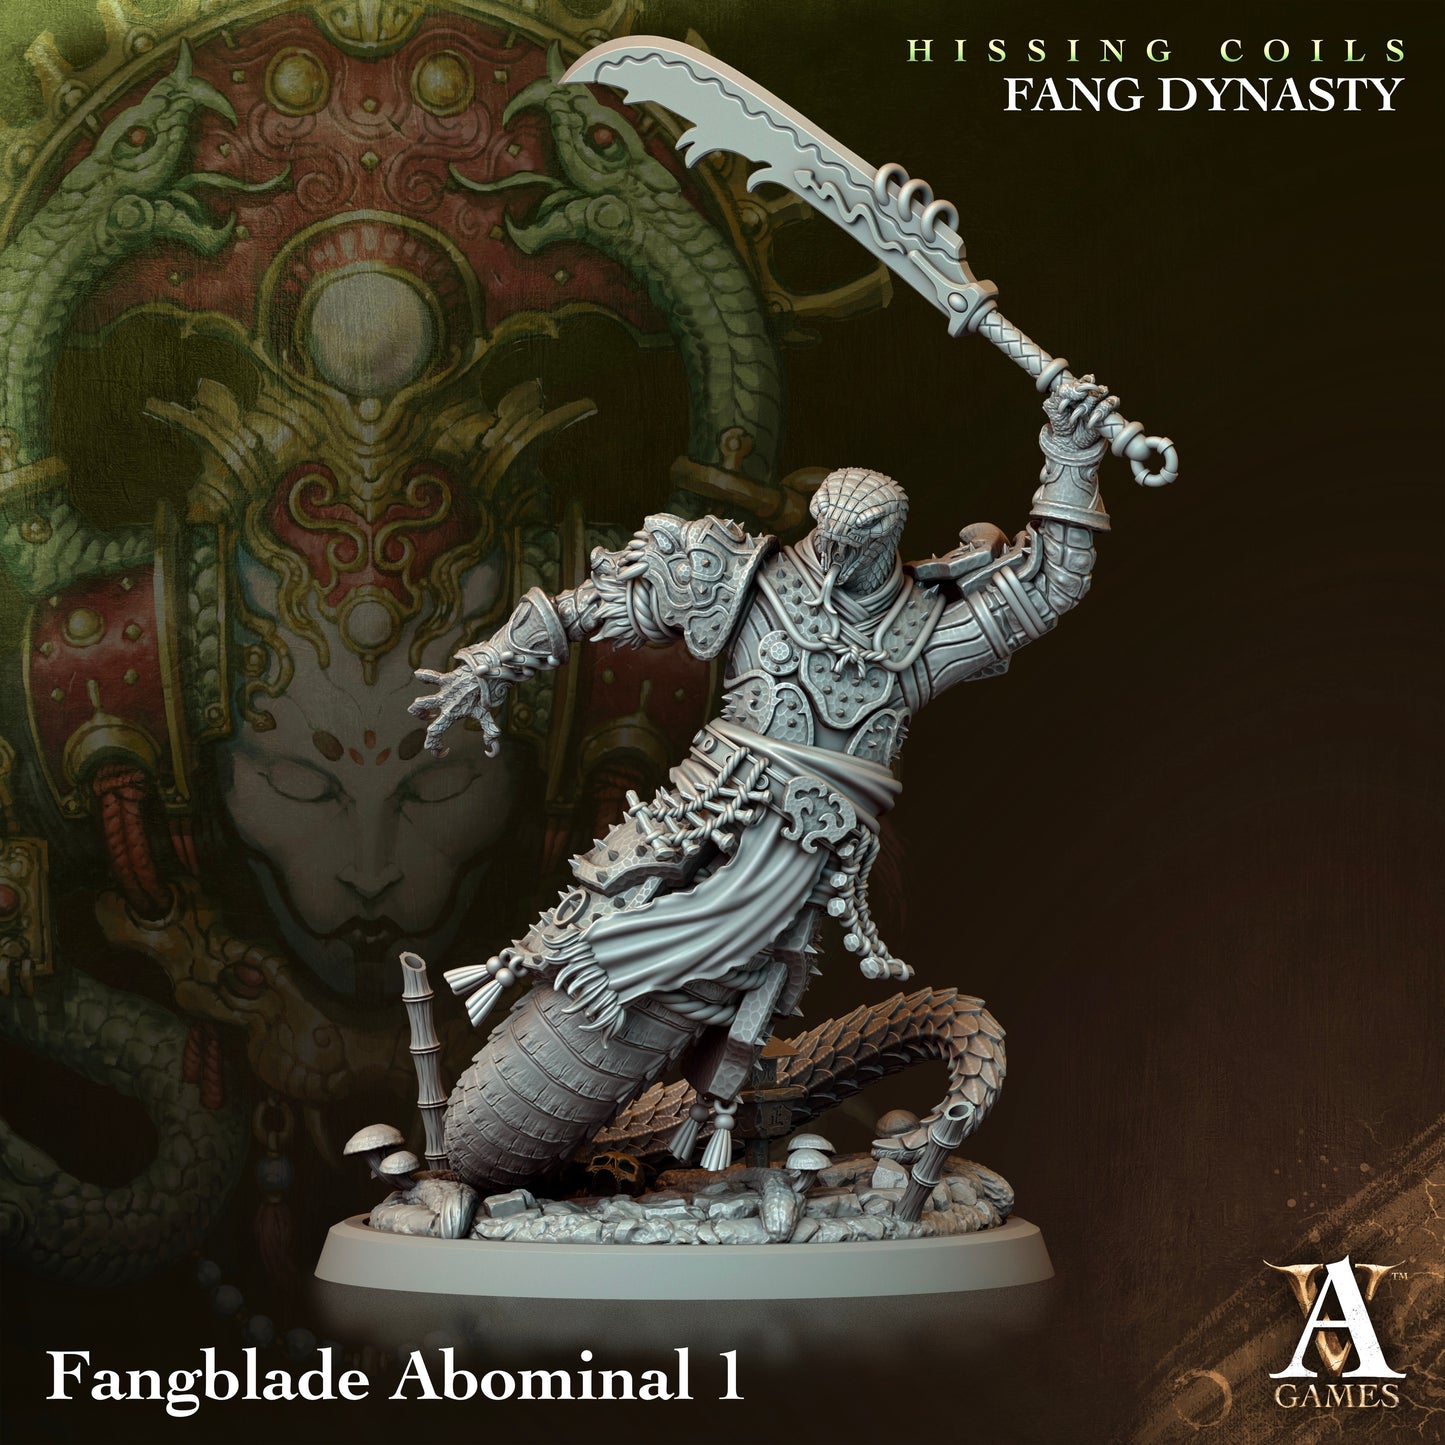 Fangblade Abominal